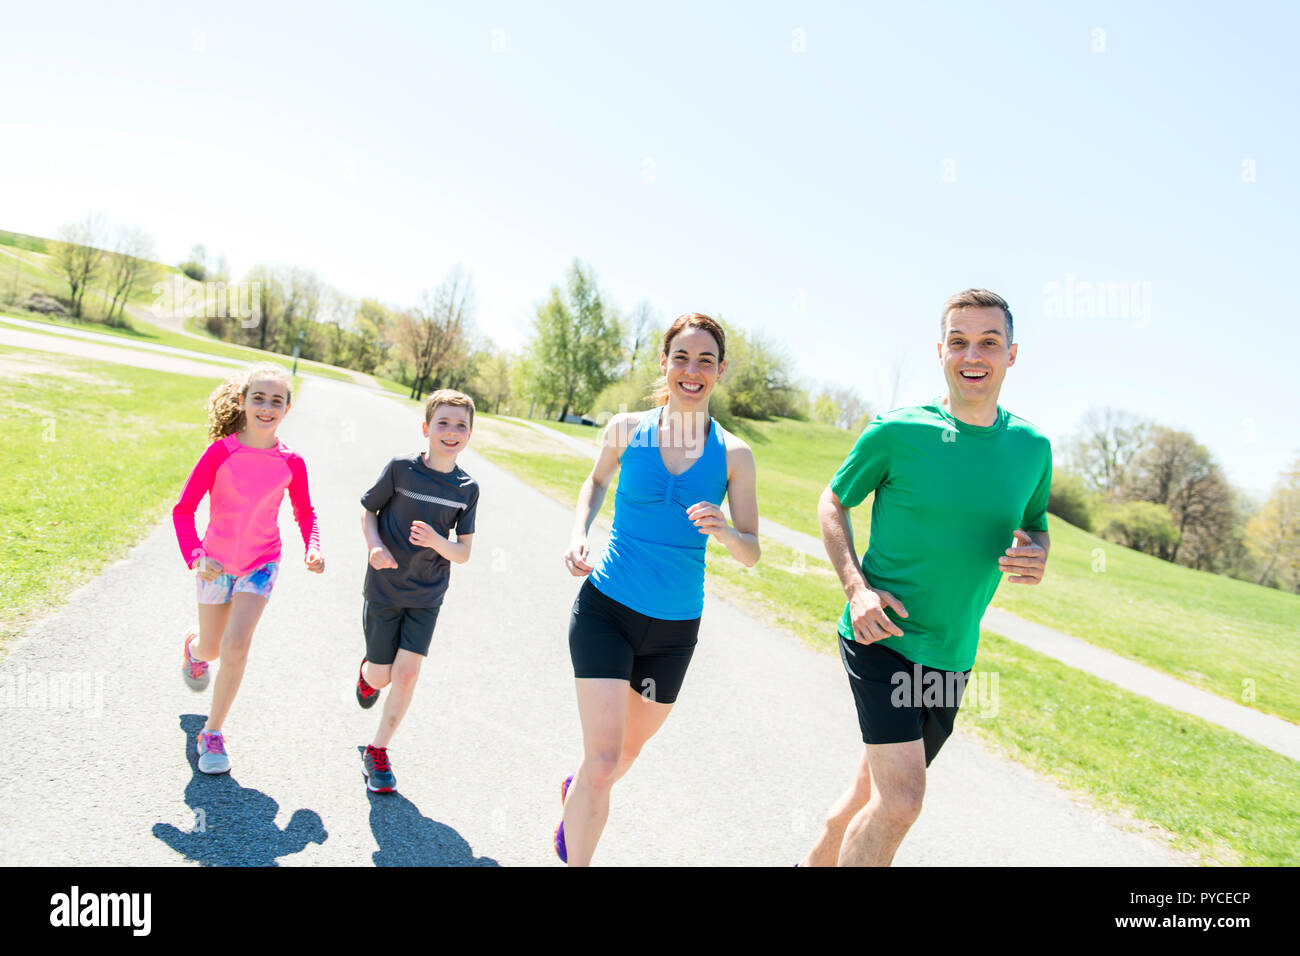 Parents with children sport running together outside Stock Photo